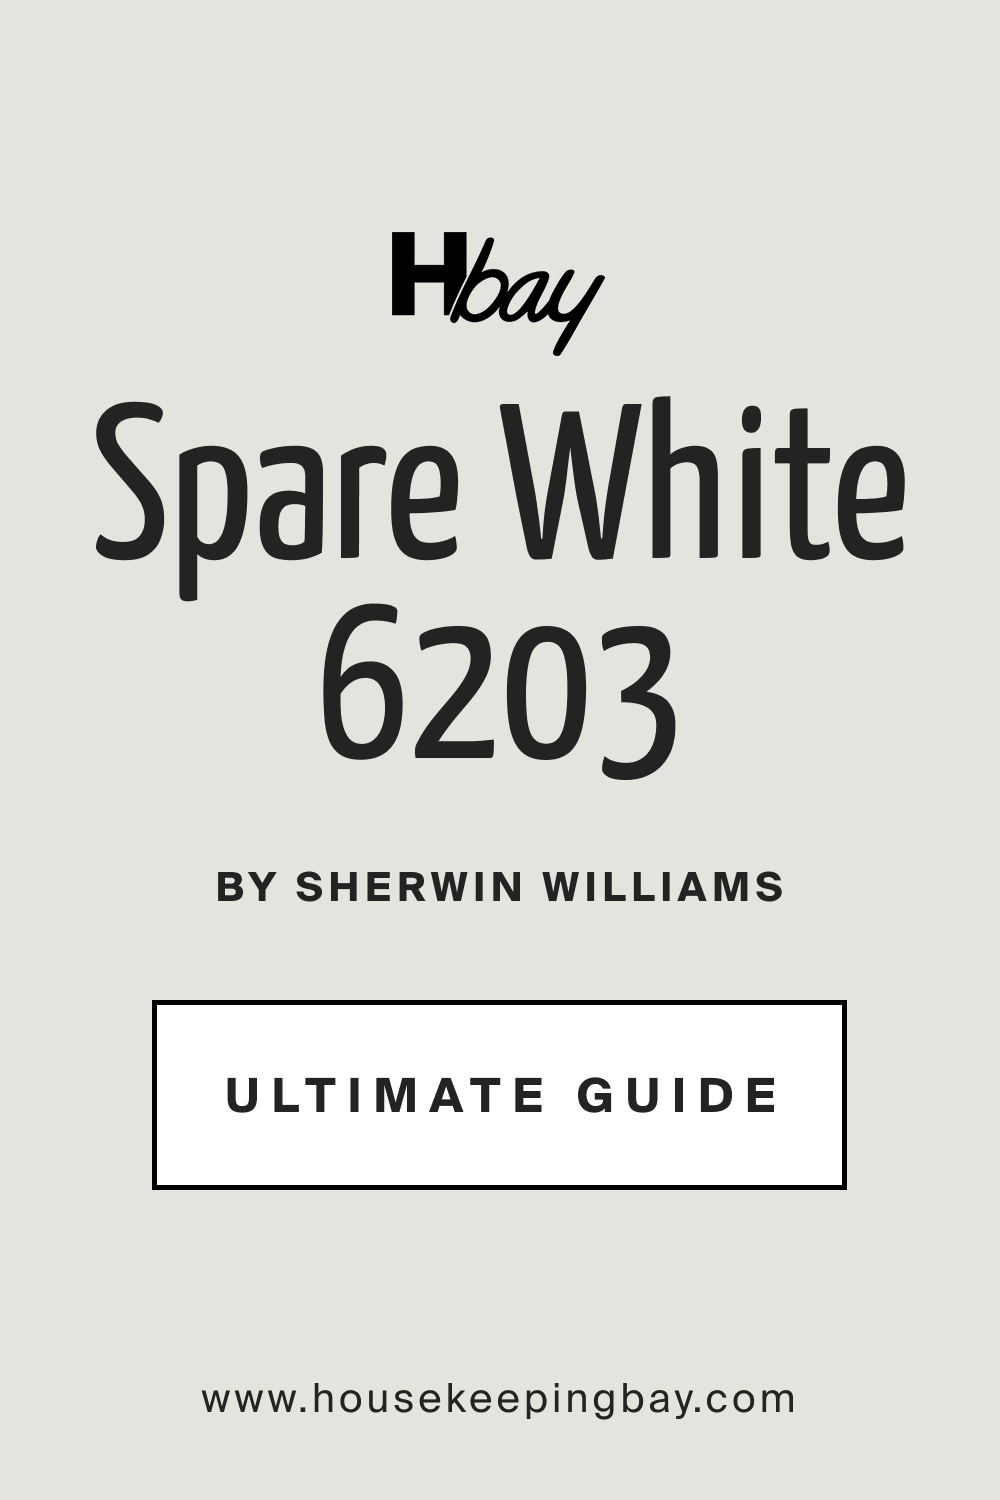 Spare White SW 6203 by Sherwin Williams Ultimate Guide